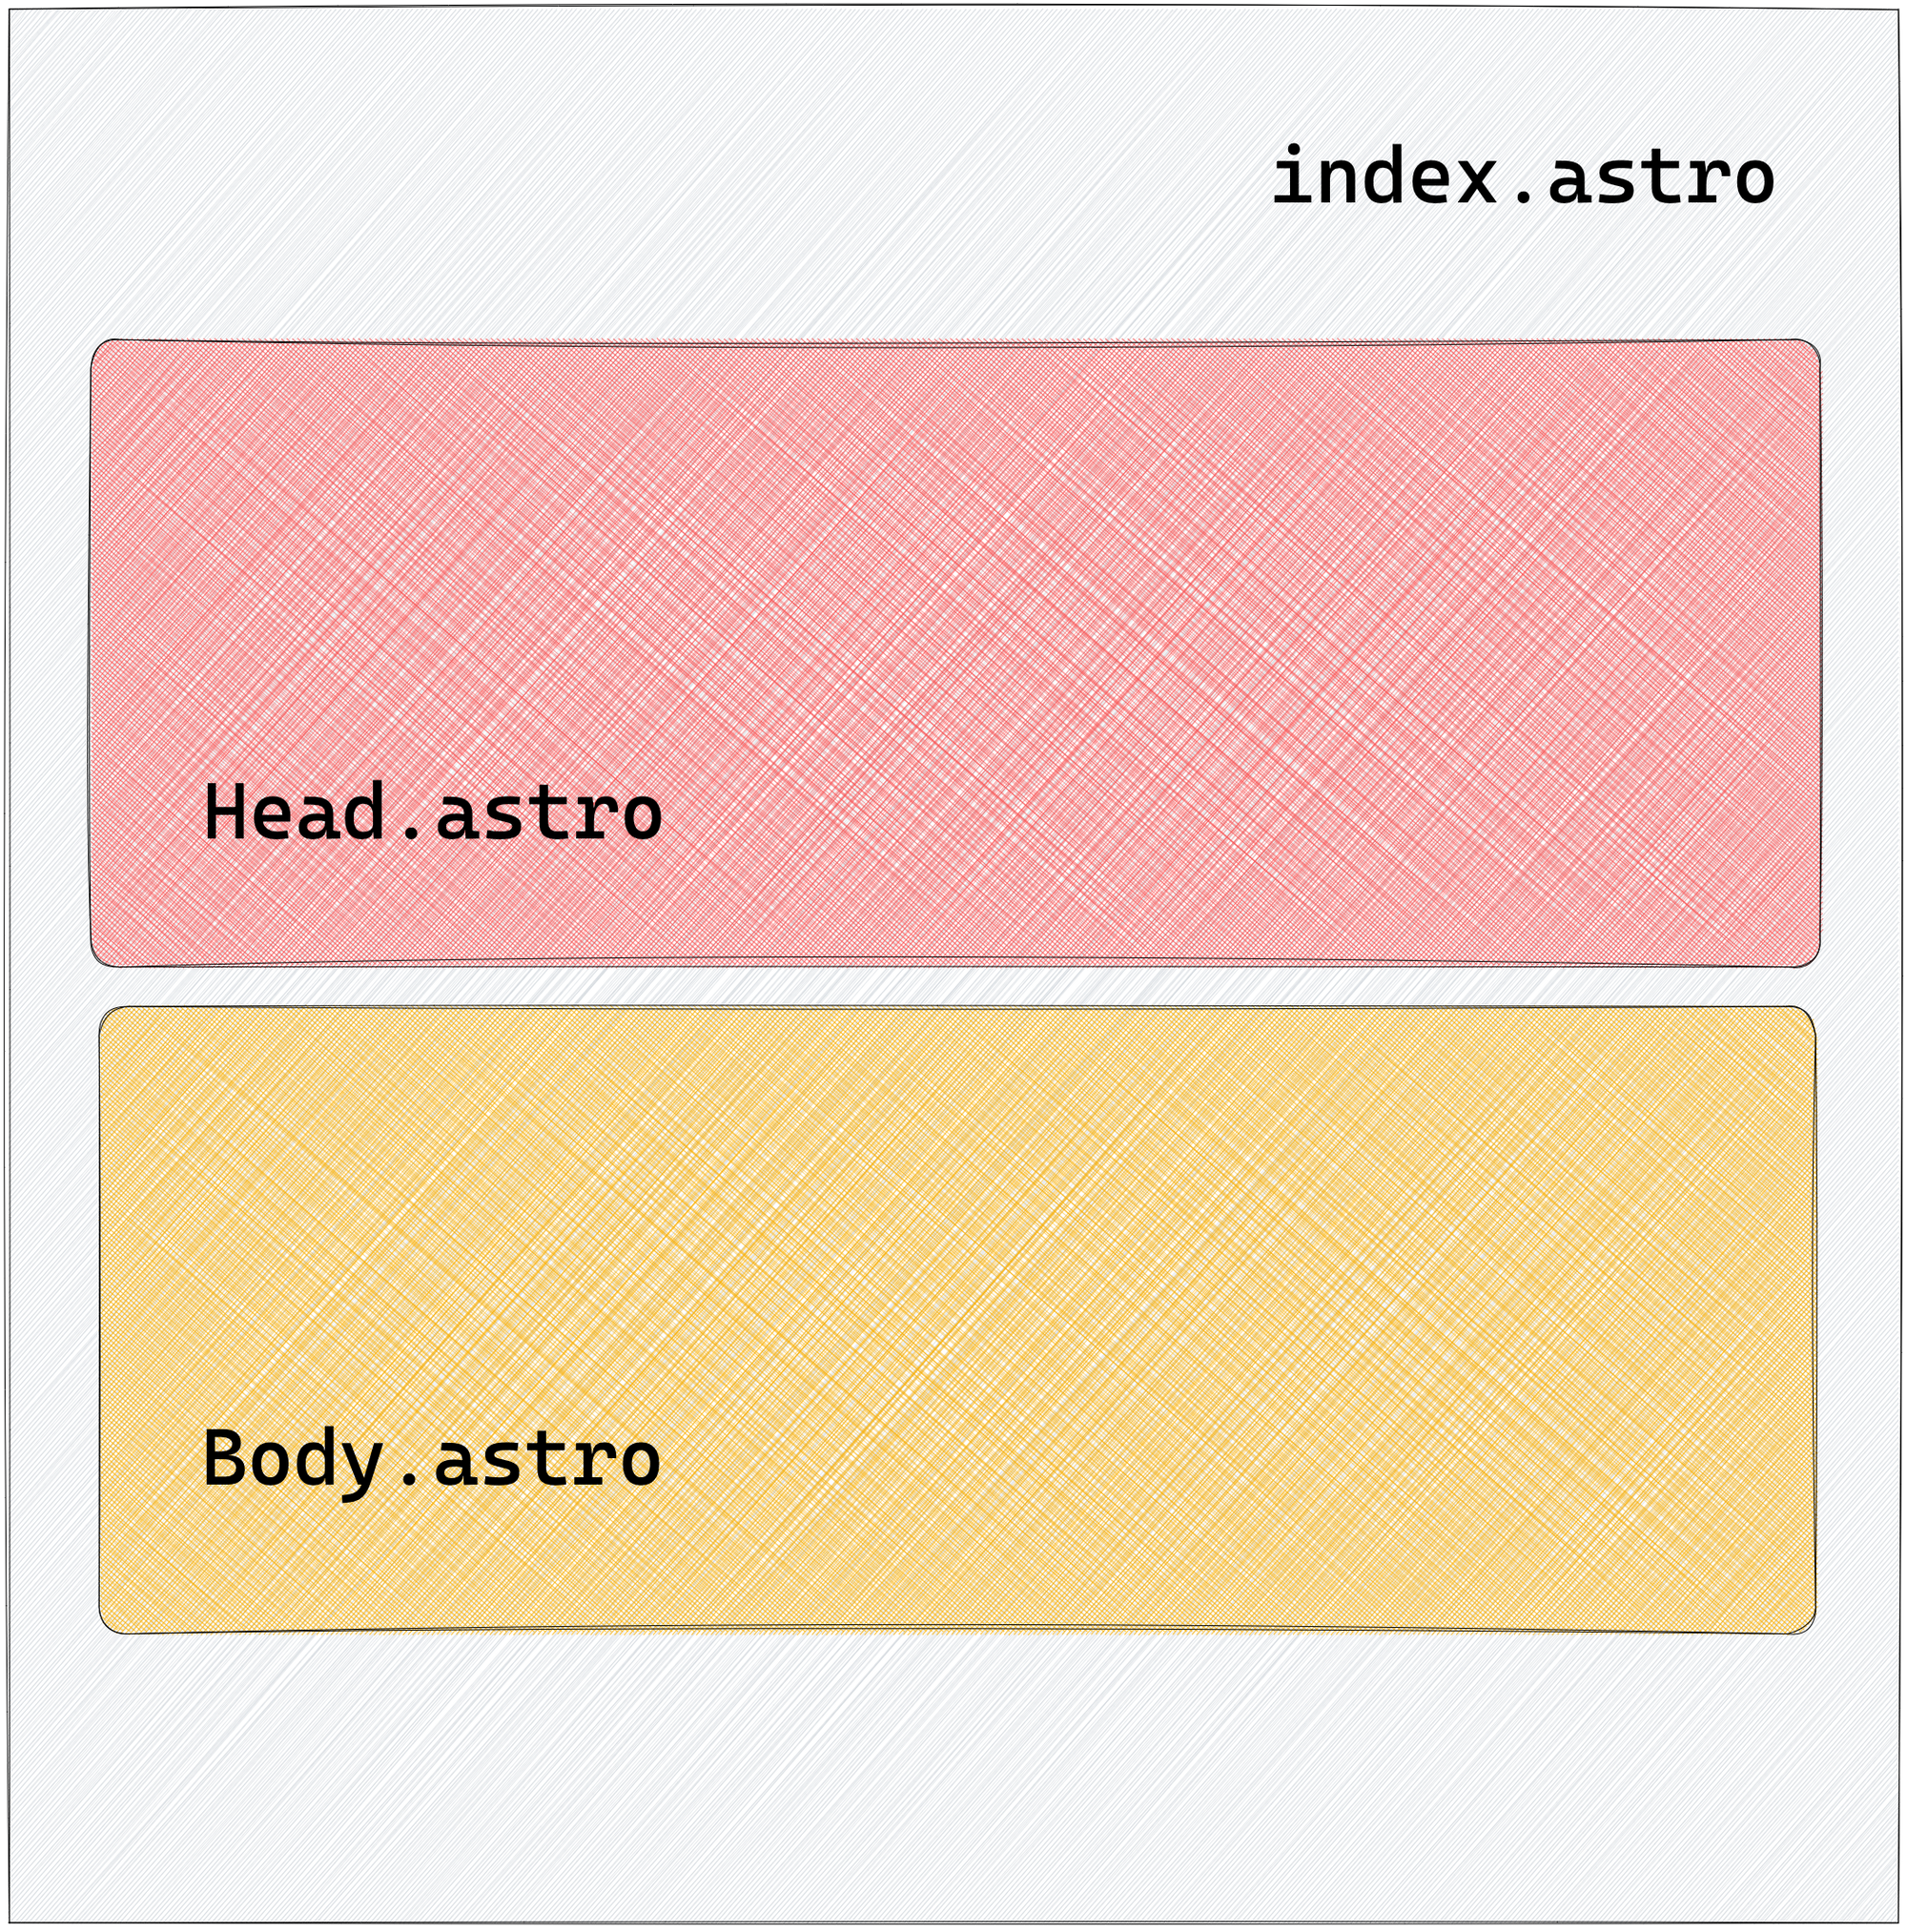 Composing the index page from the Head and Body components